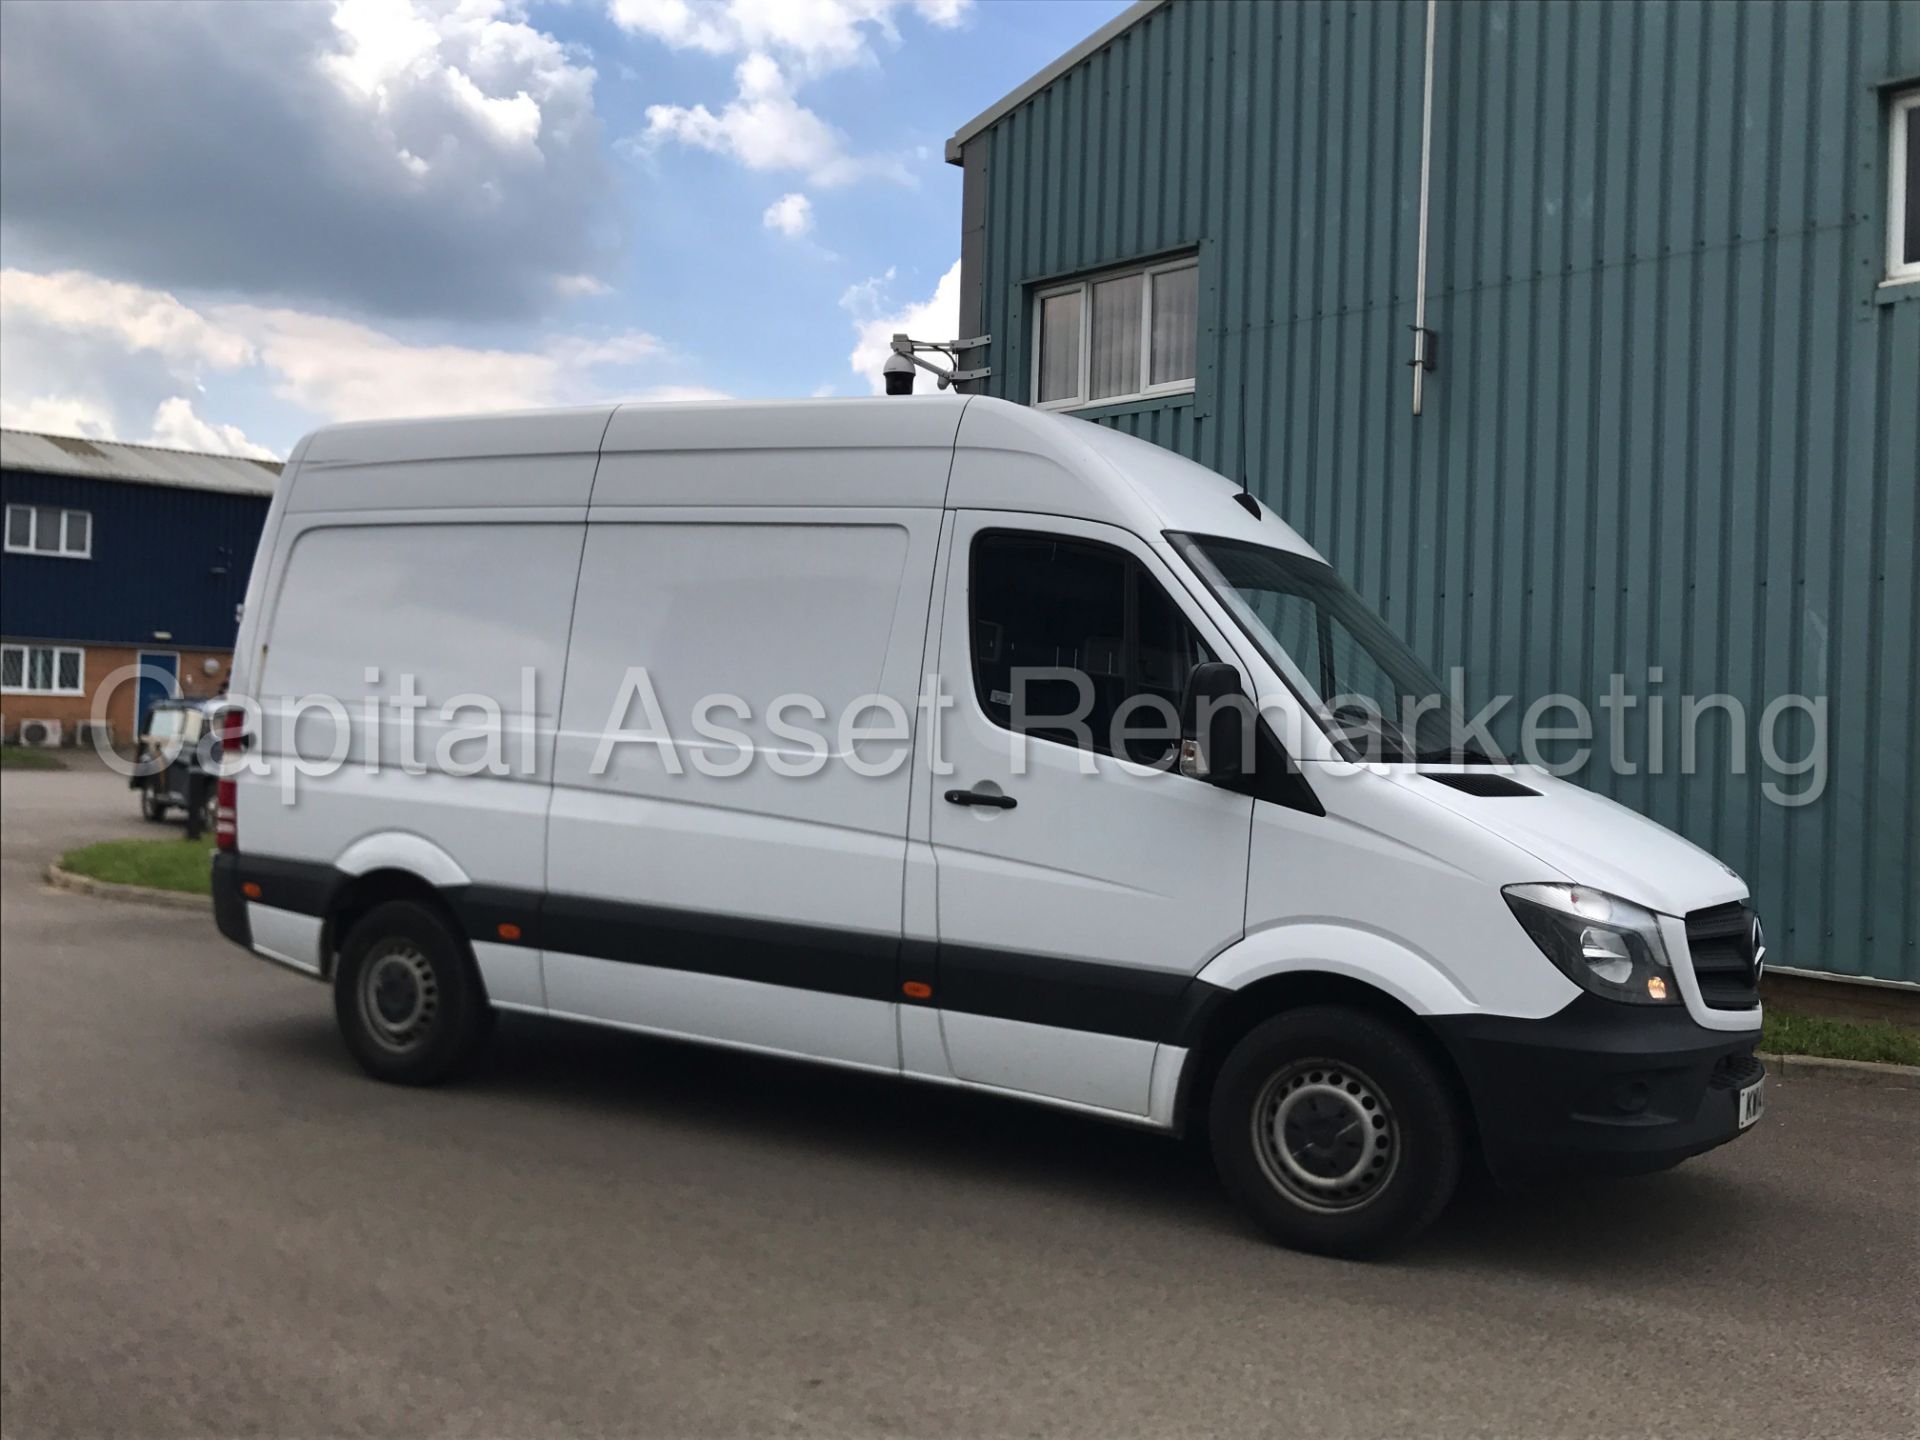 MERCEDES-BENZ SPRINTER 313 CDI 'MWB HI-ROOF' (2014) '130 BHP - 6 SPEED' (1 COMPANY OWNER FROM NEW) - Image 9 of 22